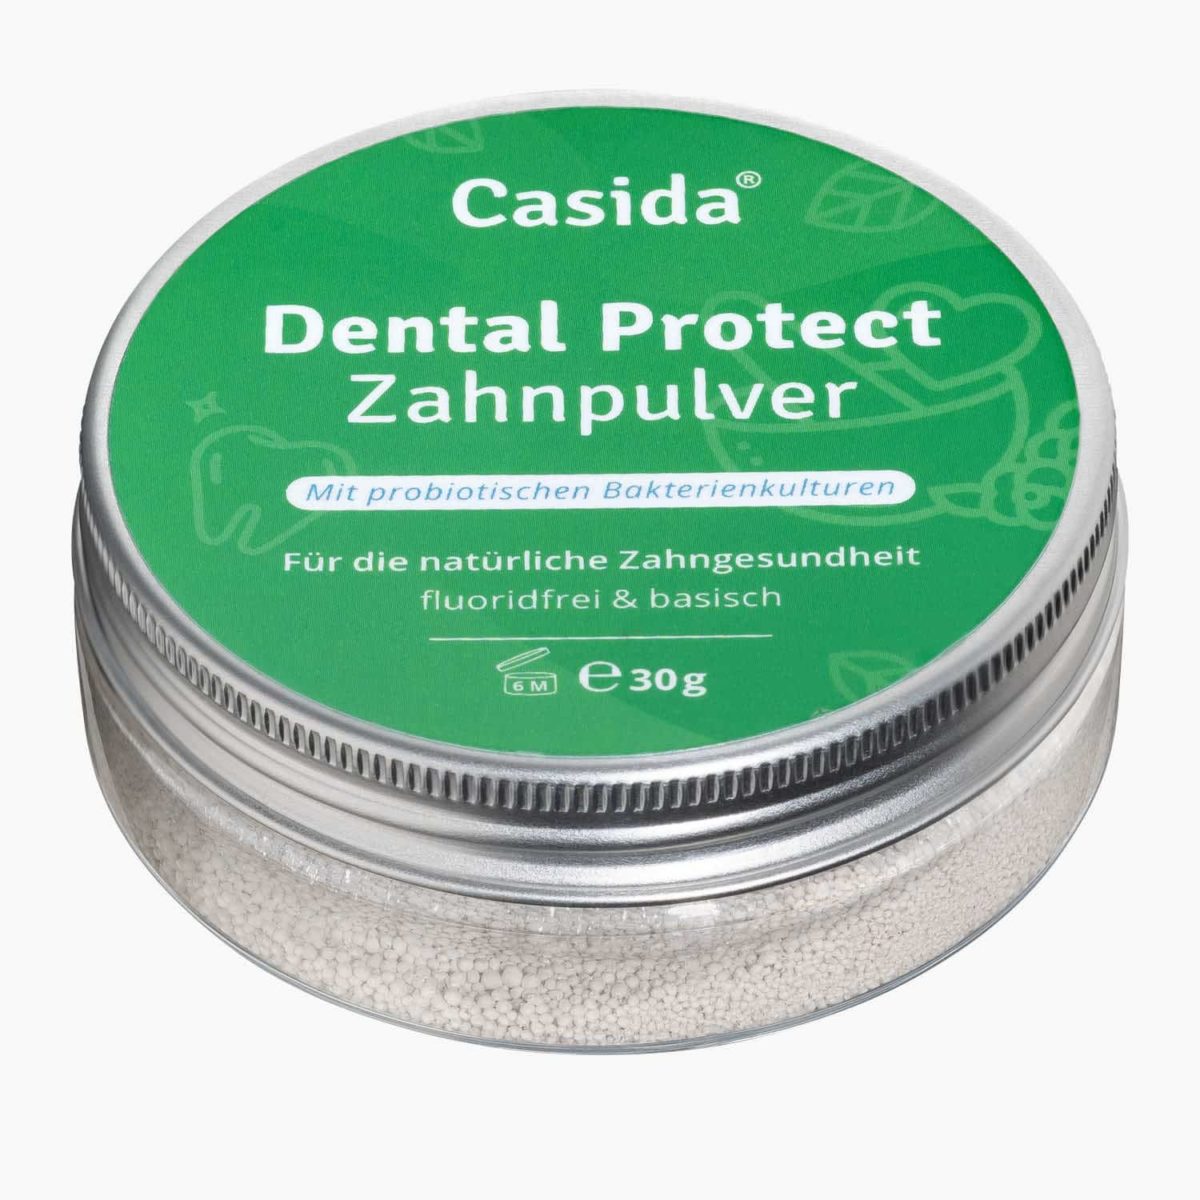 Casida Dental Protect Tooth Powder 30 g 16918444 PZN pharmacy caries Dental care periodontal disease gums oral flora protection